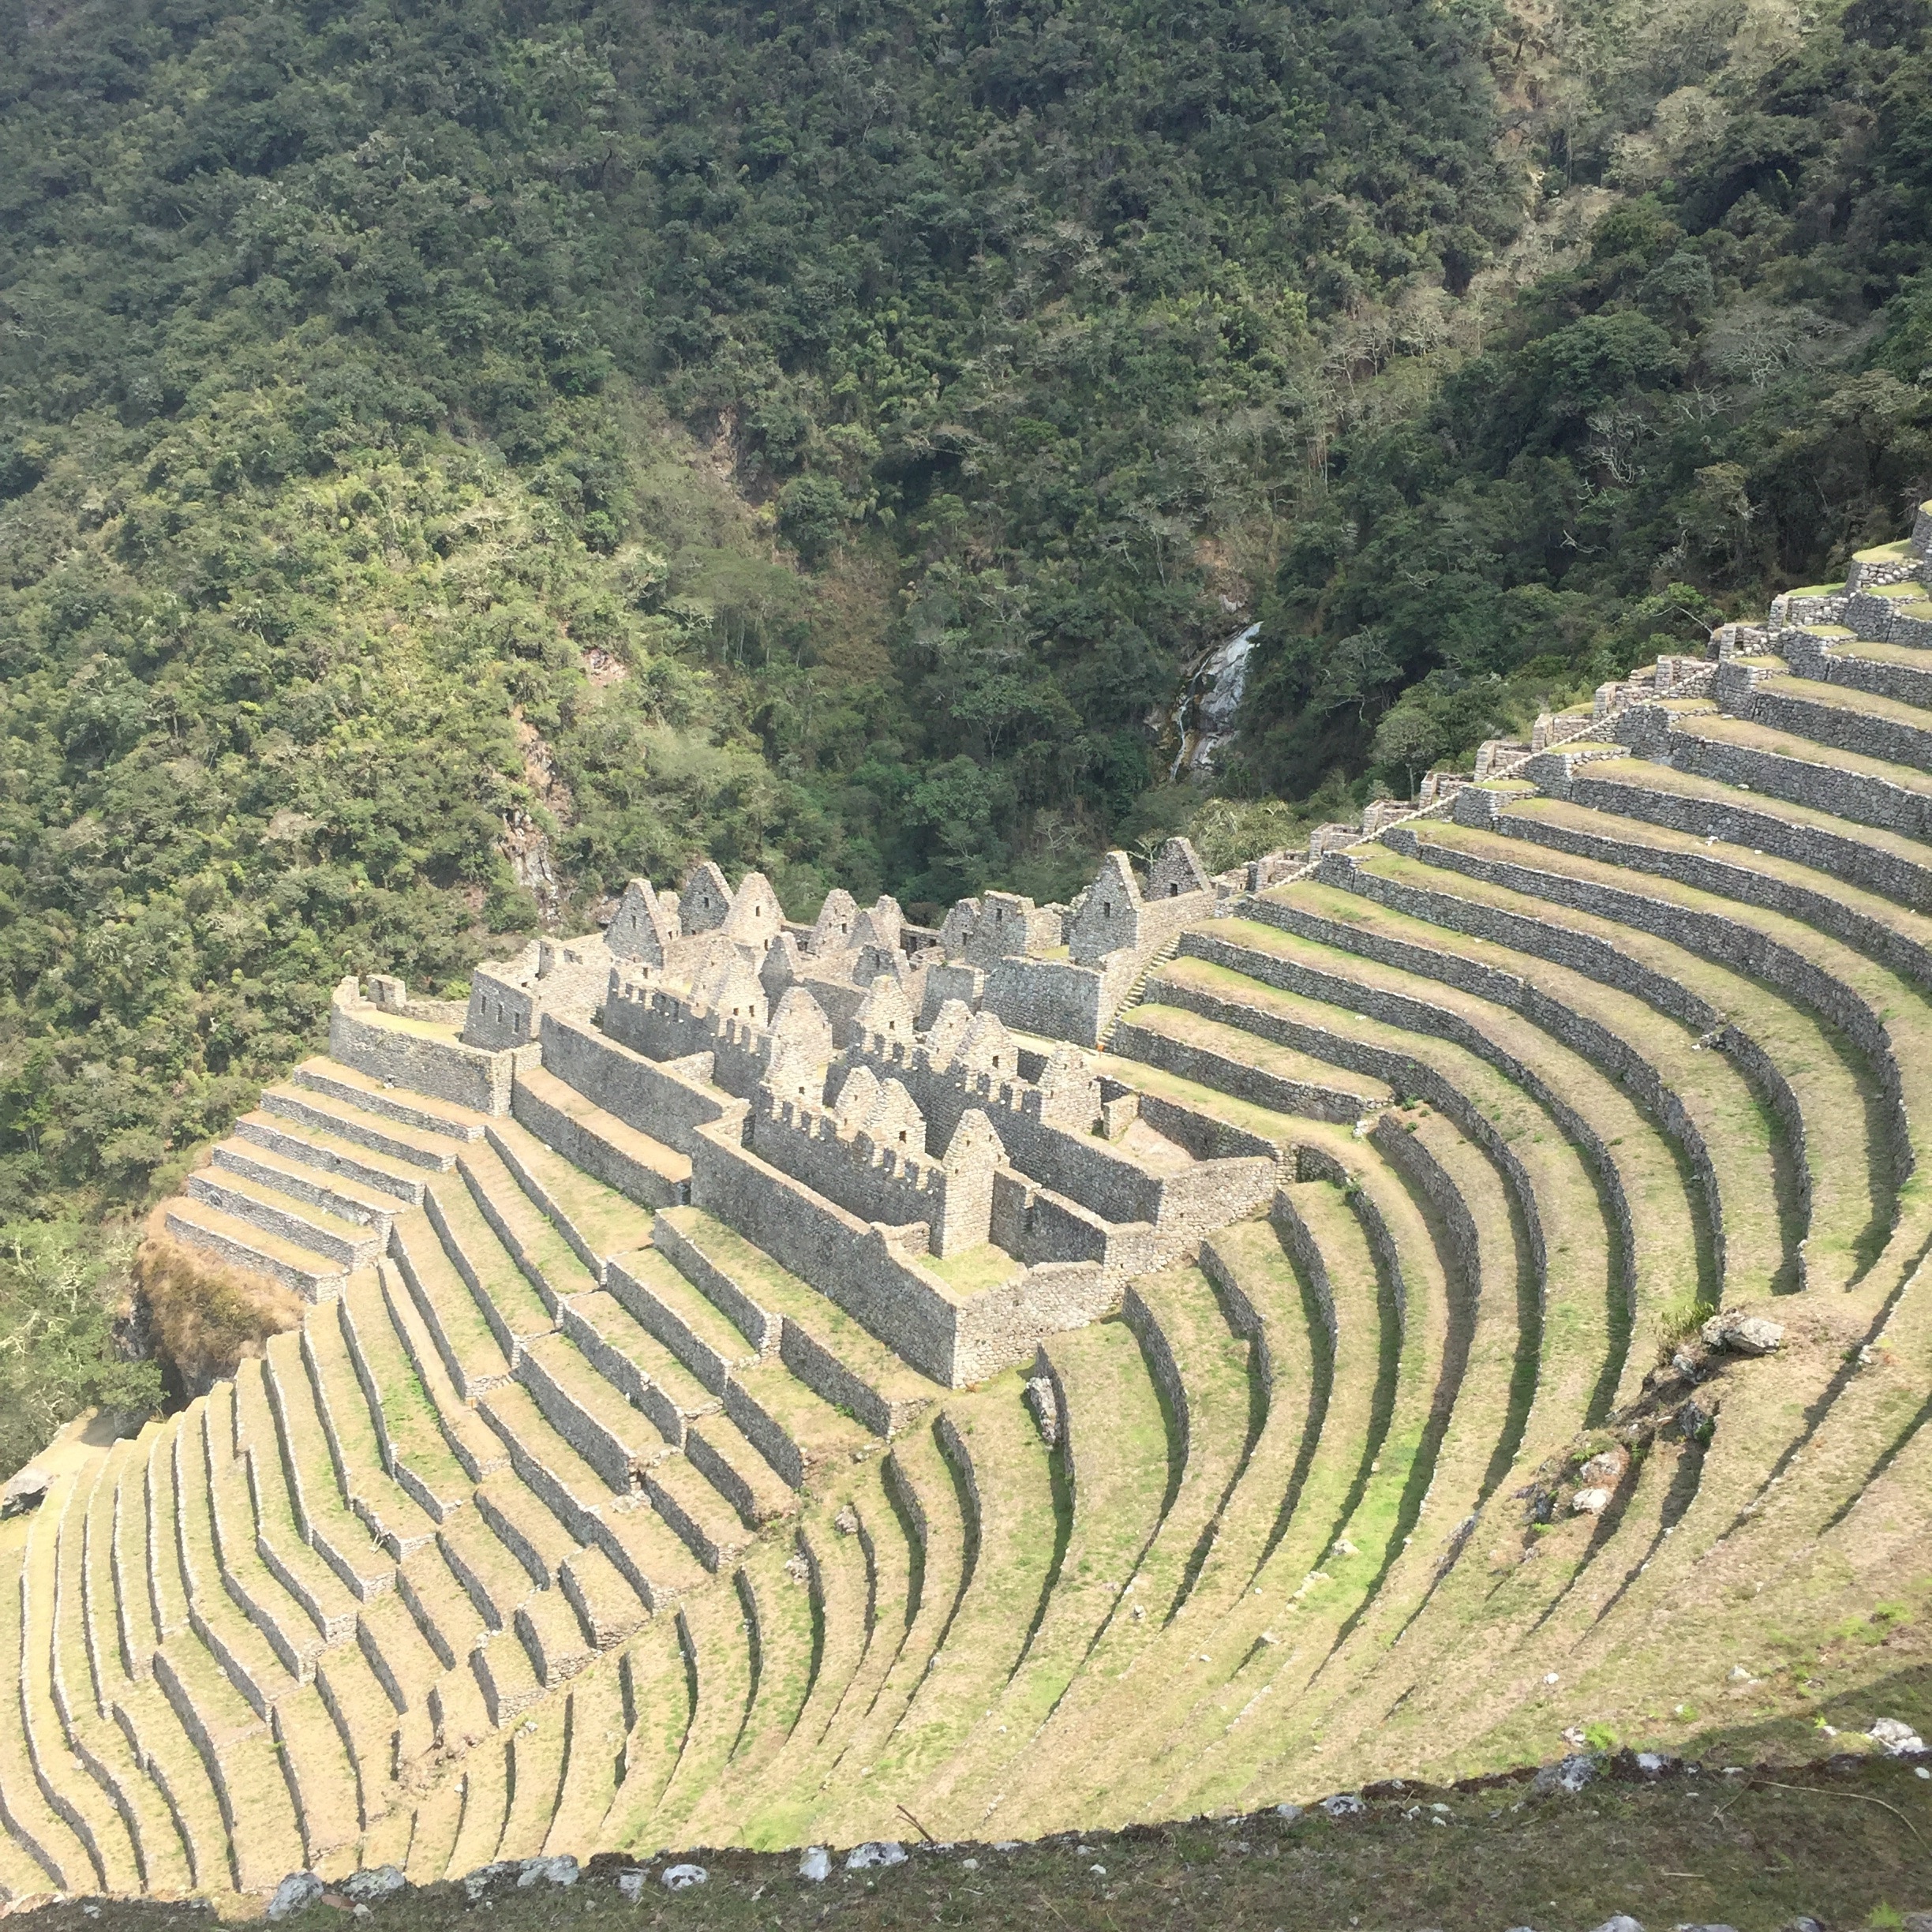 Inca Ruins on the trail to Machu Picchu. These impressive ruins hug the steep slope of the mountainside and provide fantastic panoramic views of the Andes. #stunningstructures